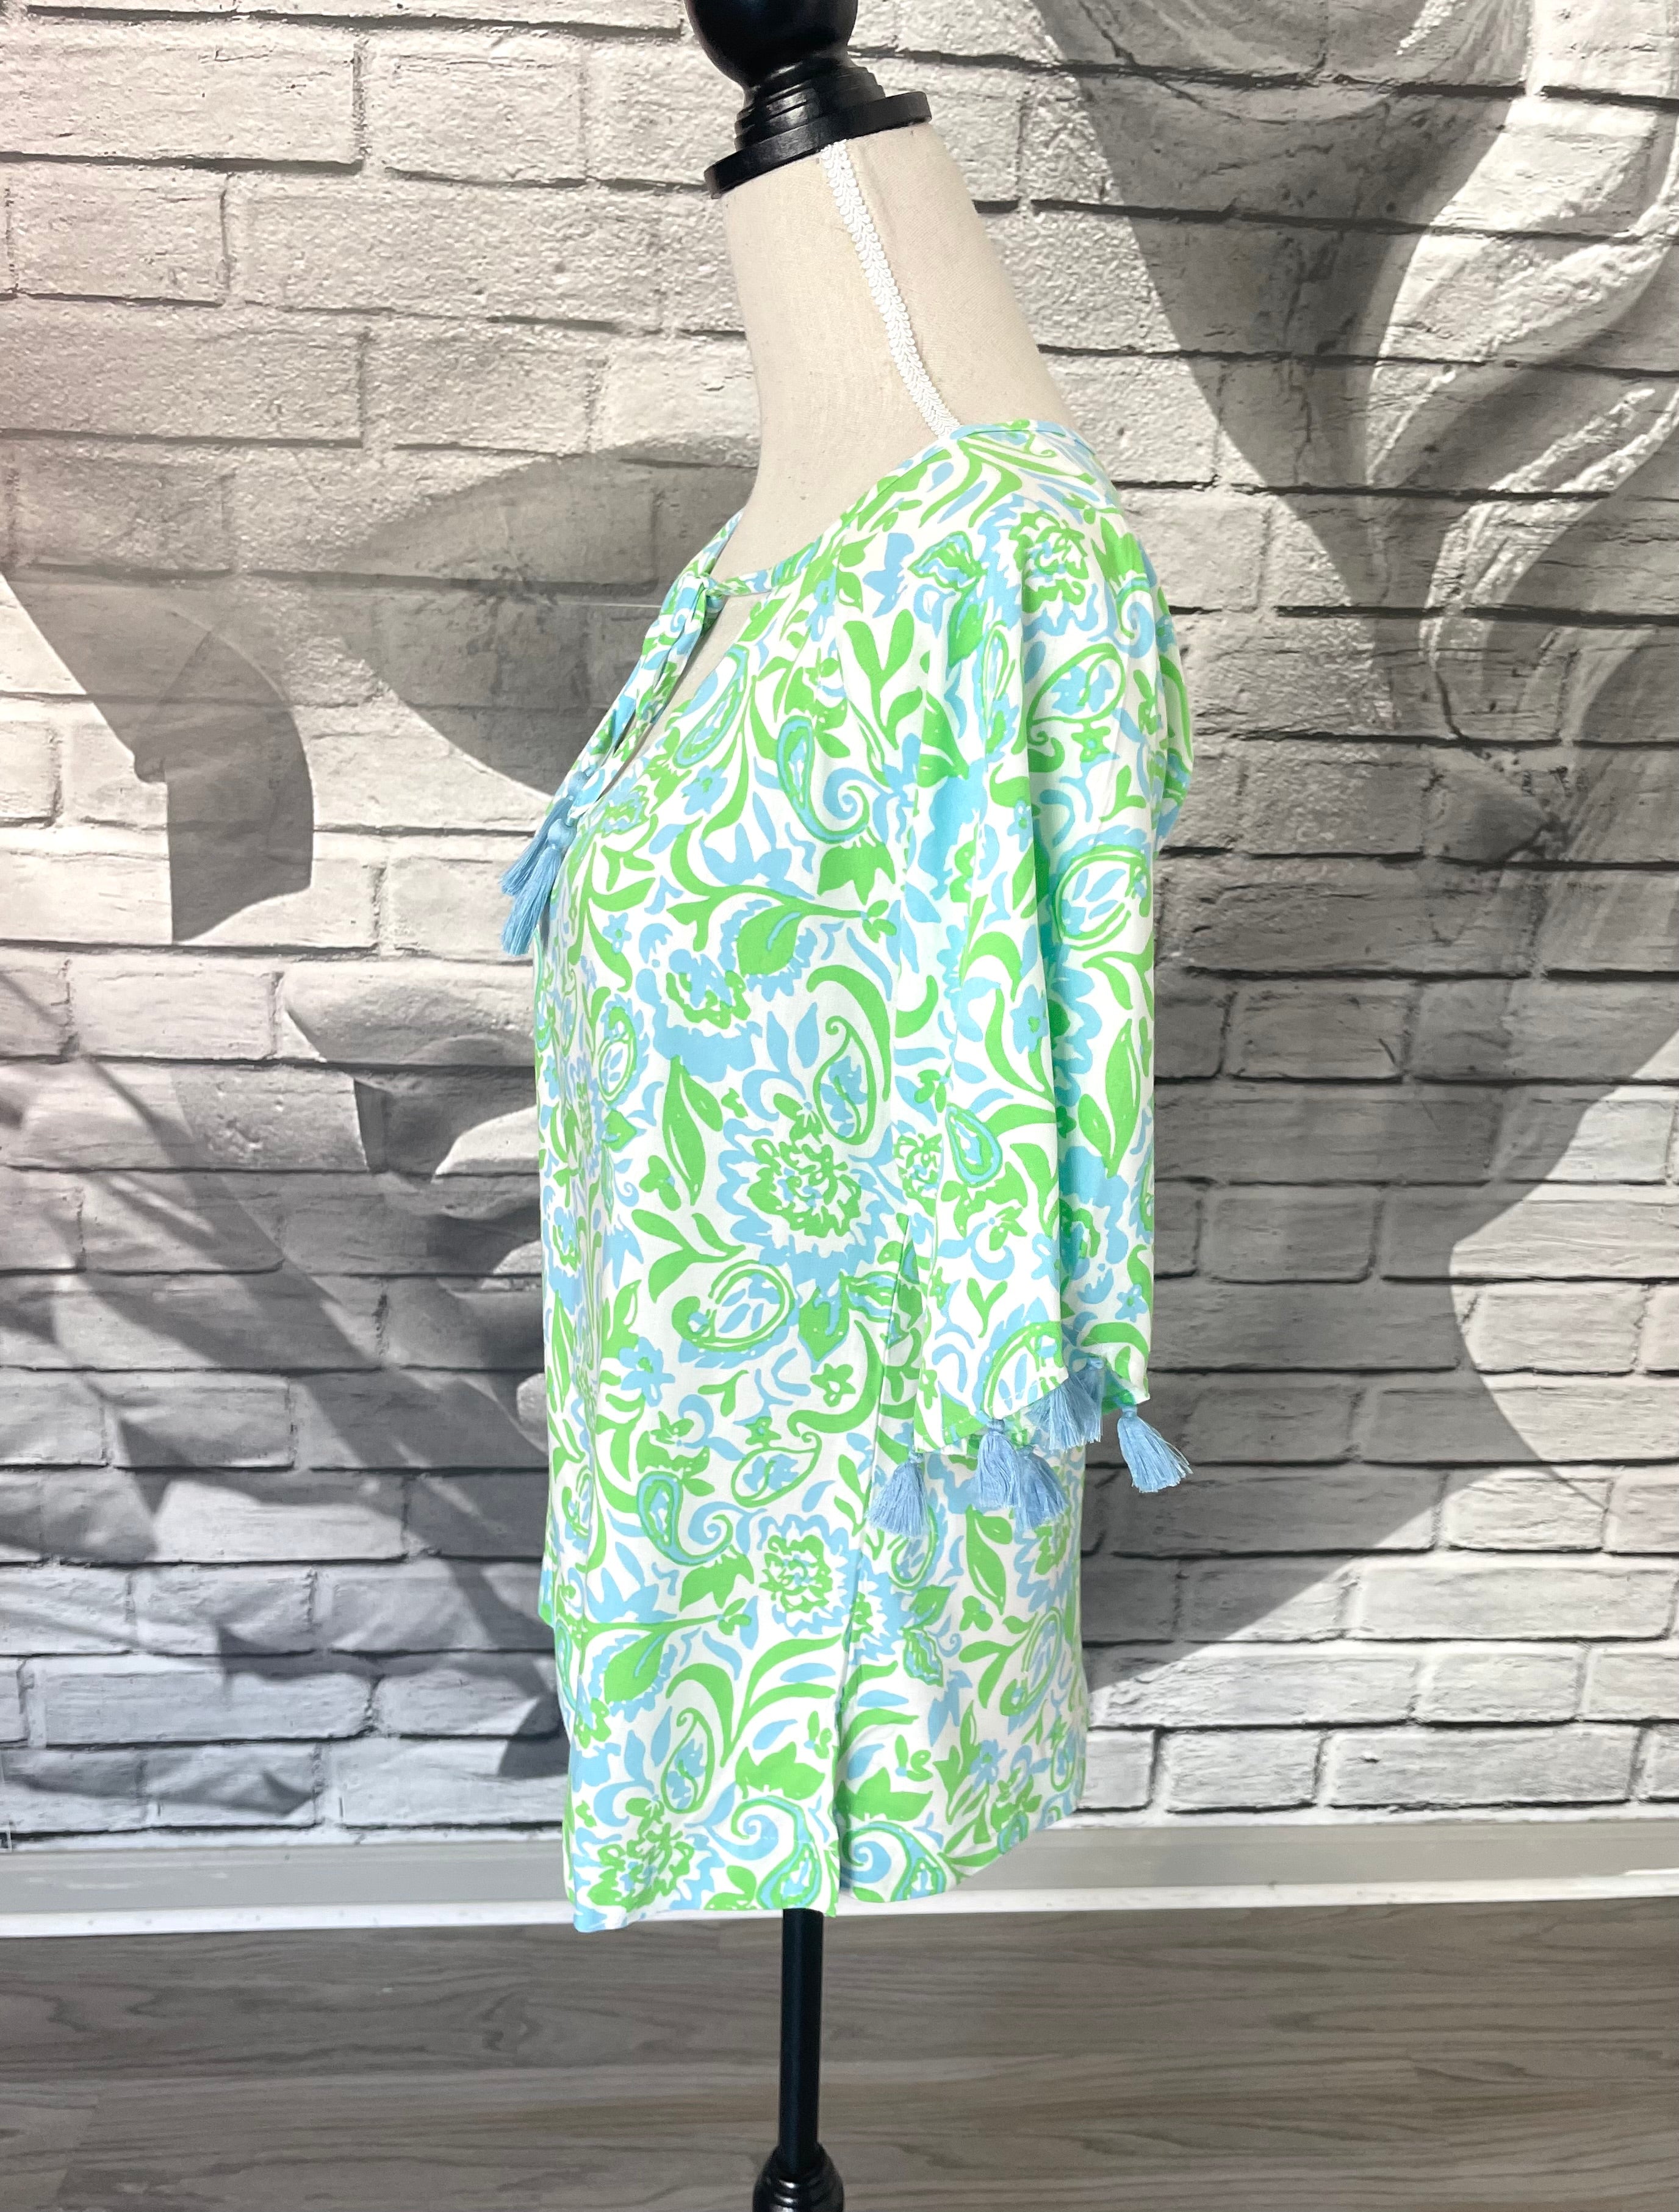 Lynn Top in Lime Paisely